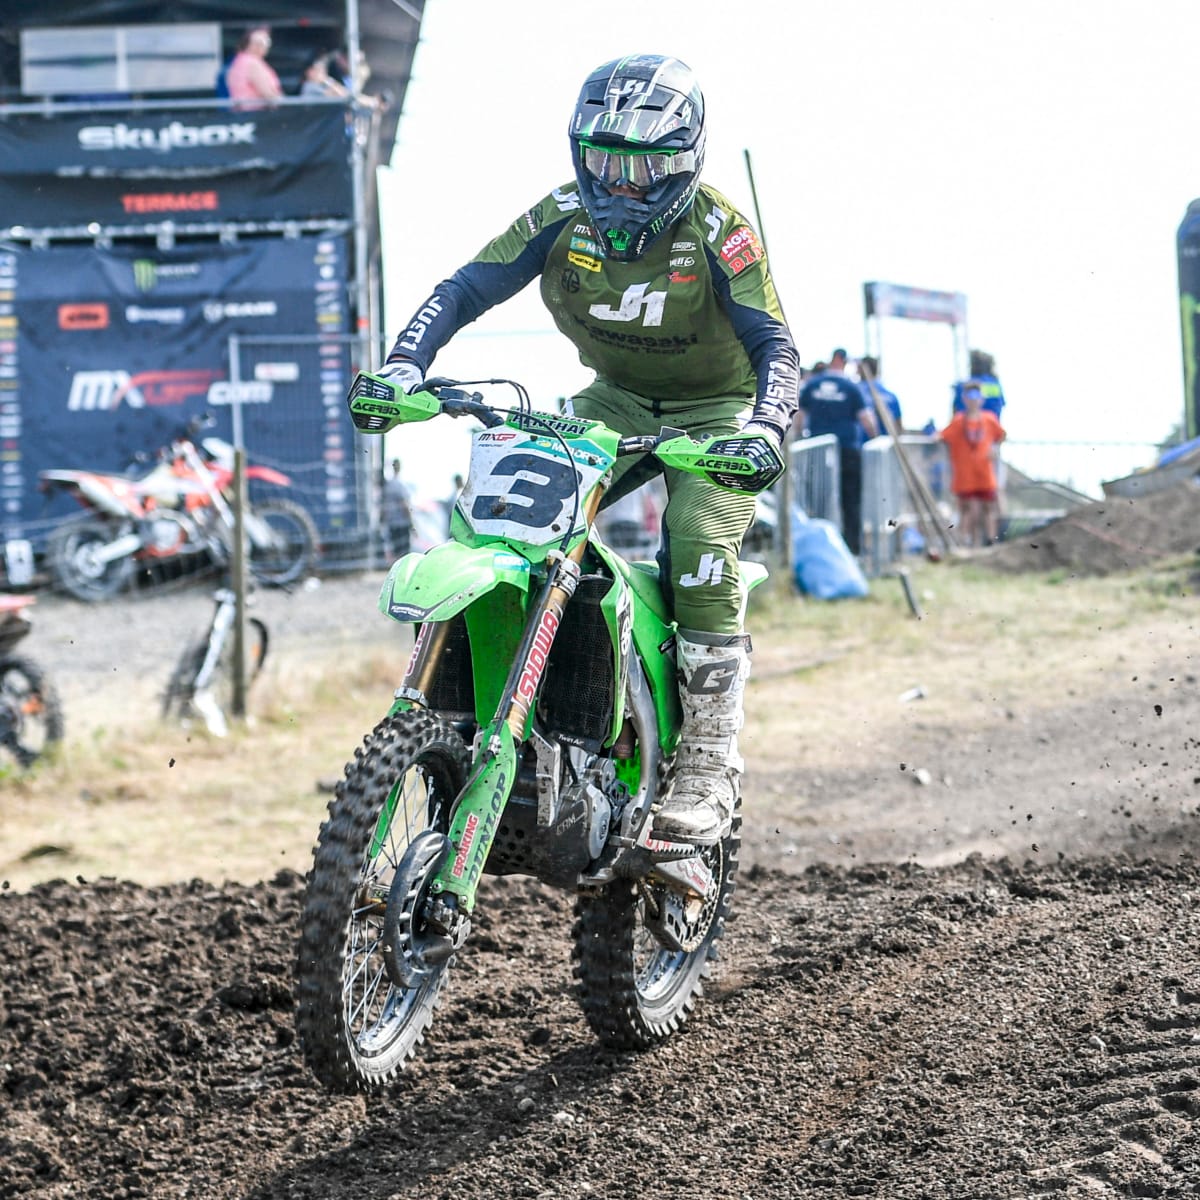 AMA Super Motocross Series Free Live Stream Motorcycle Racing - How to Watch and Stream Major League and College Sports